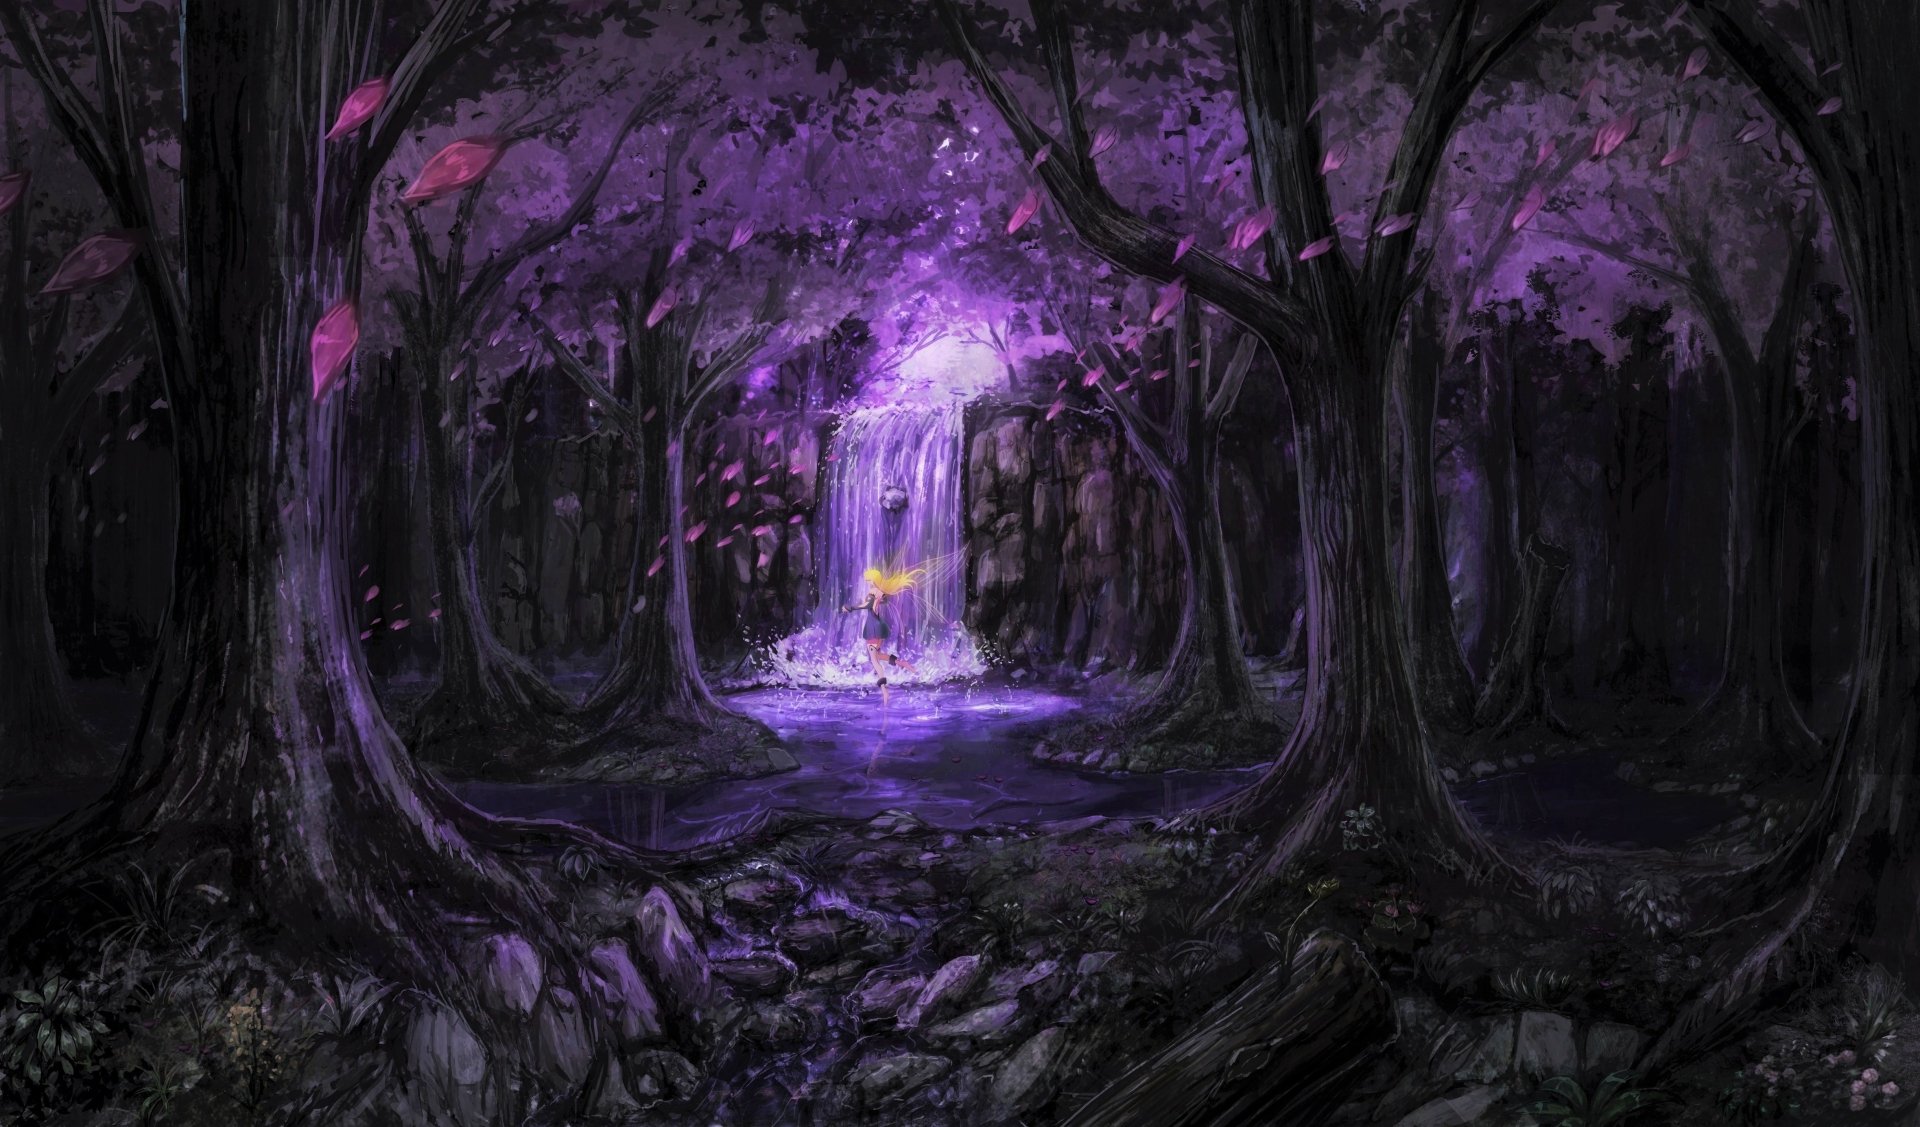 4881x2865 Fairy in Purple Fantasy Forest by そよ風 Wallpaper Background Image....